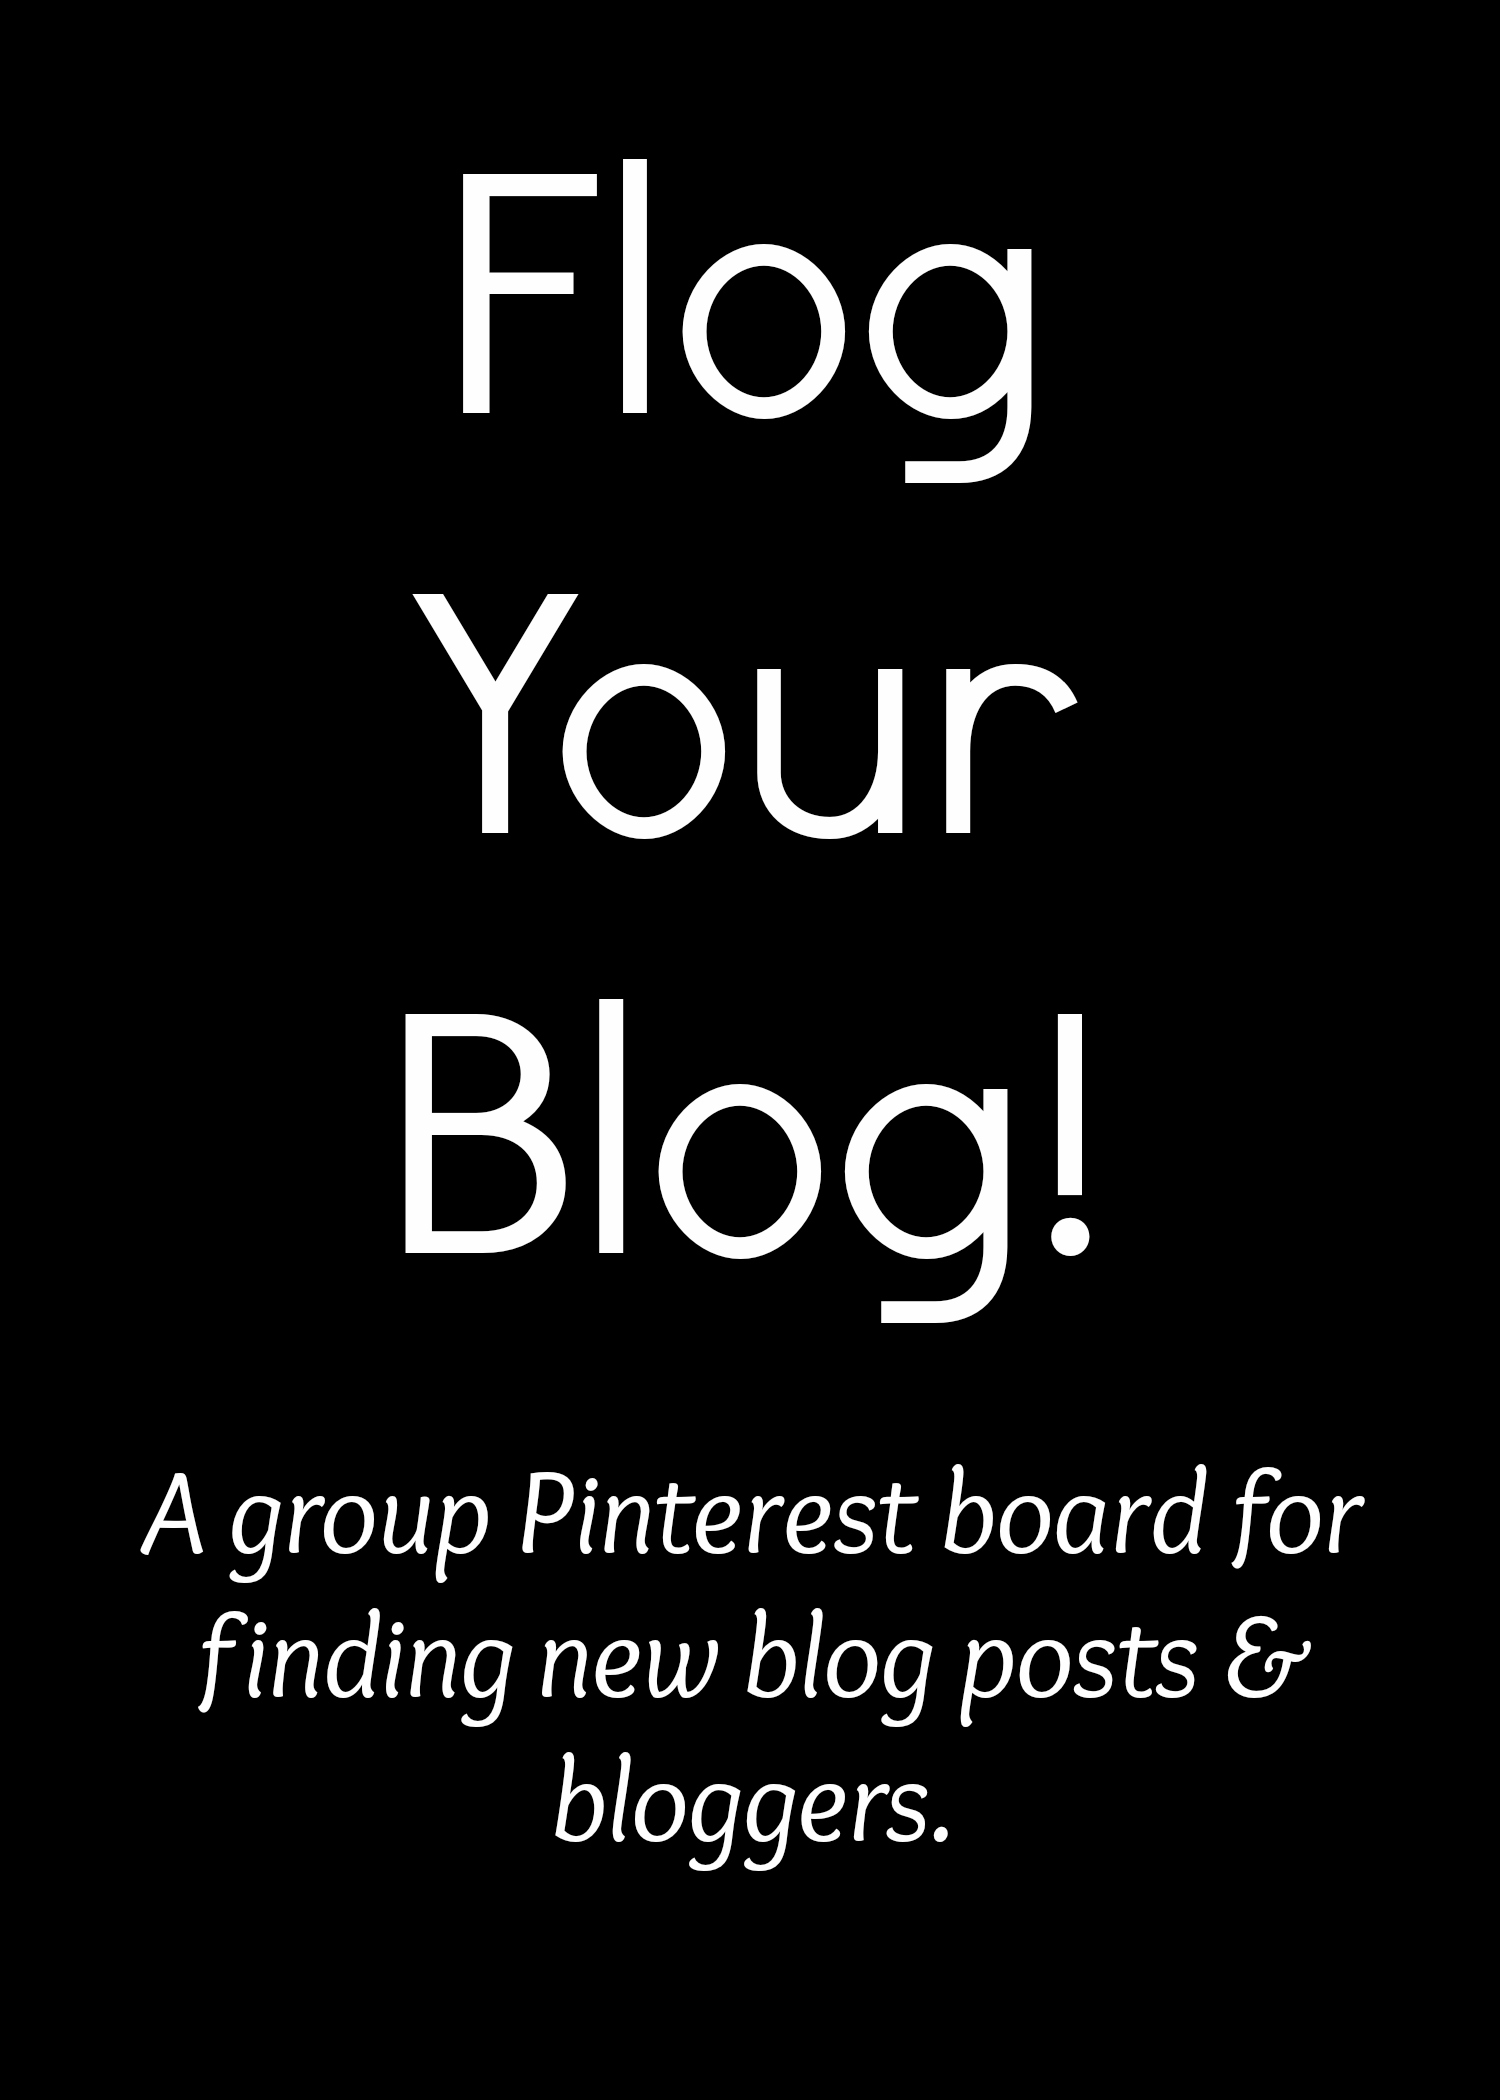 Flog Your Blog! A group Pinterest board for finding new blog posts and bloggers.